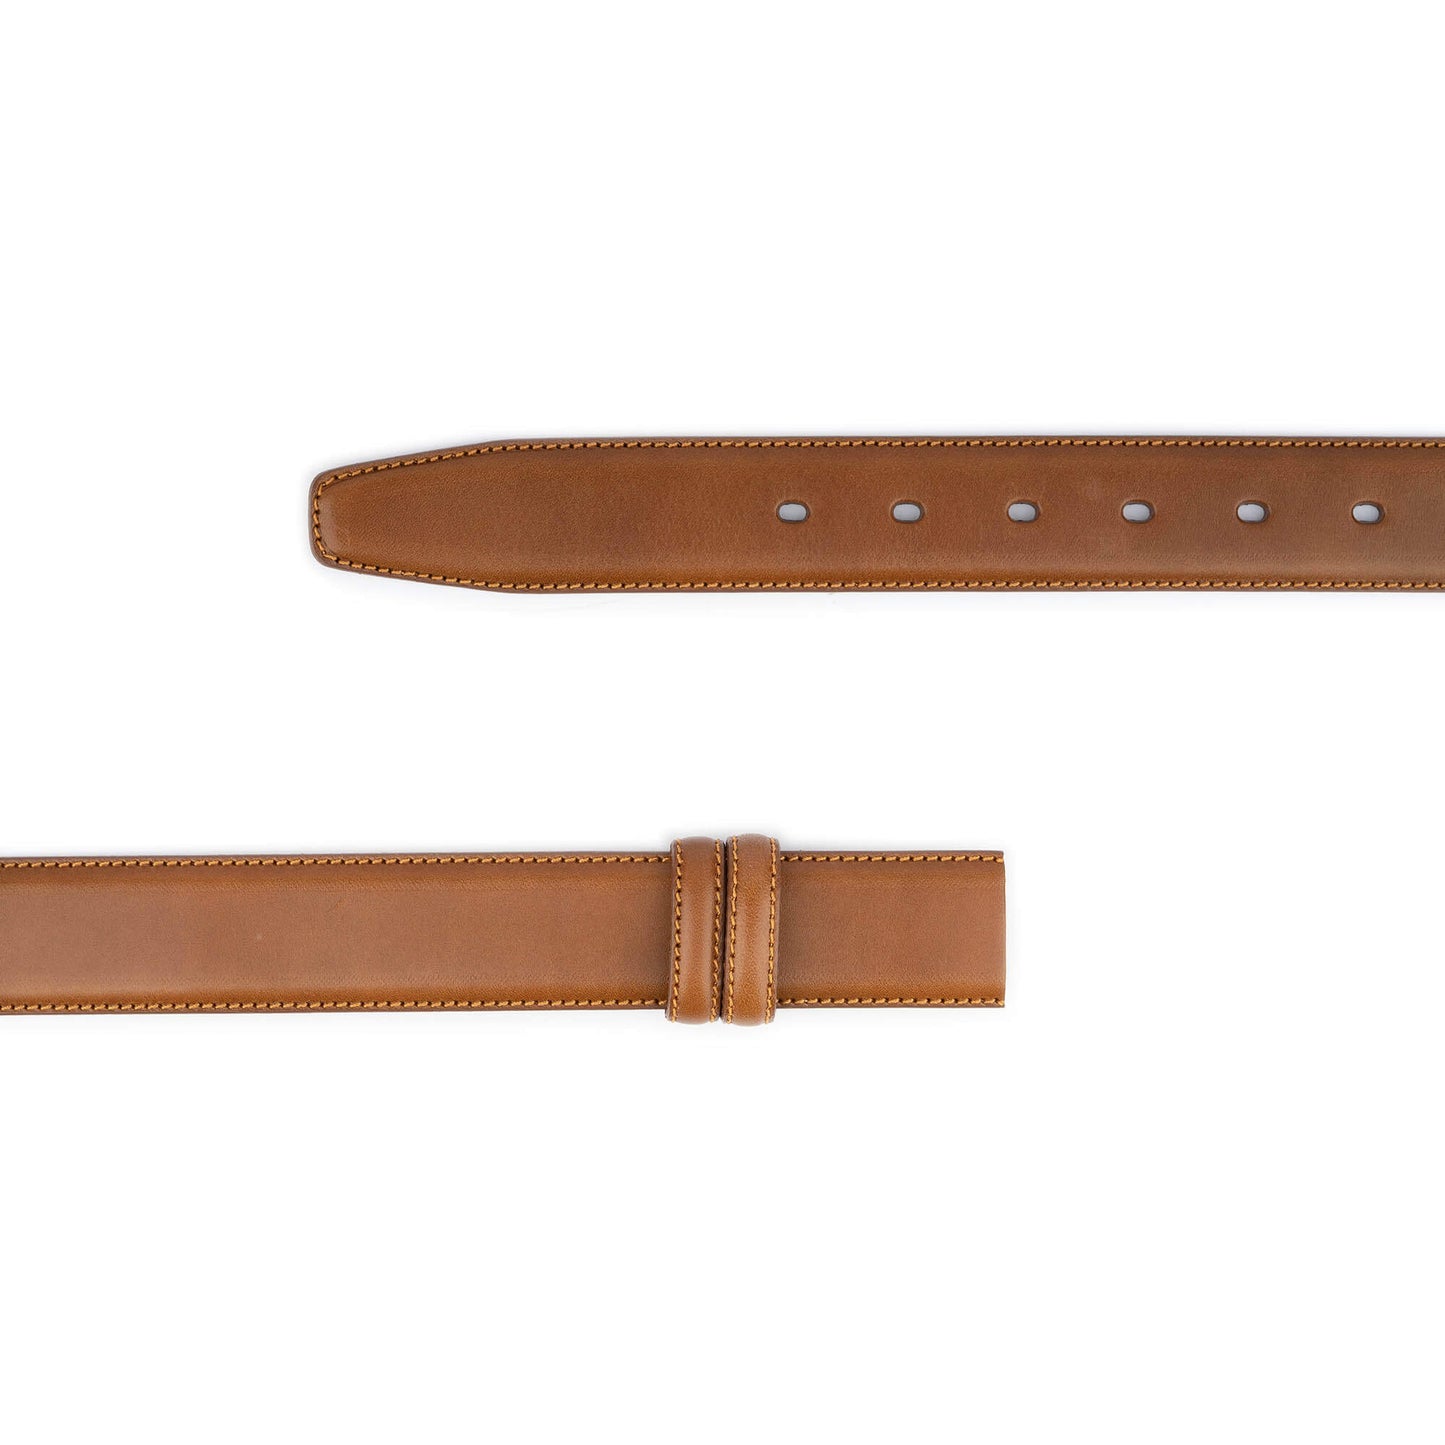 Brown Mens Leather Strap For Dunhill Belt Buckle Replacement